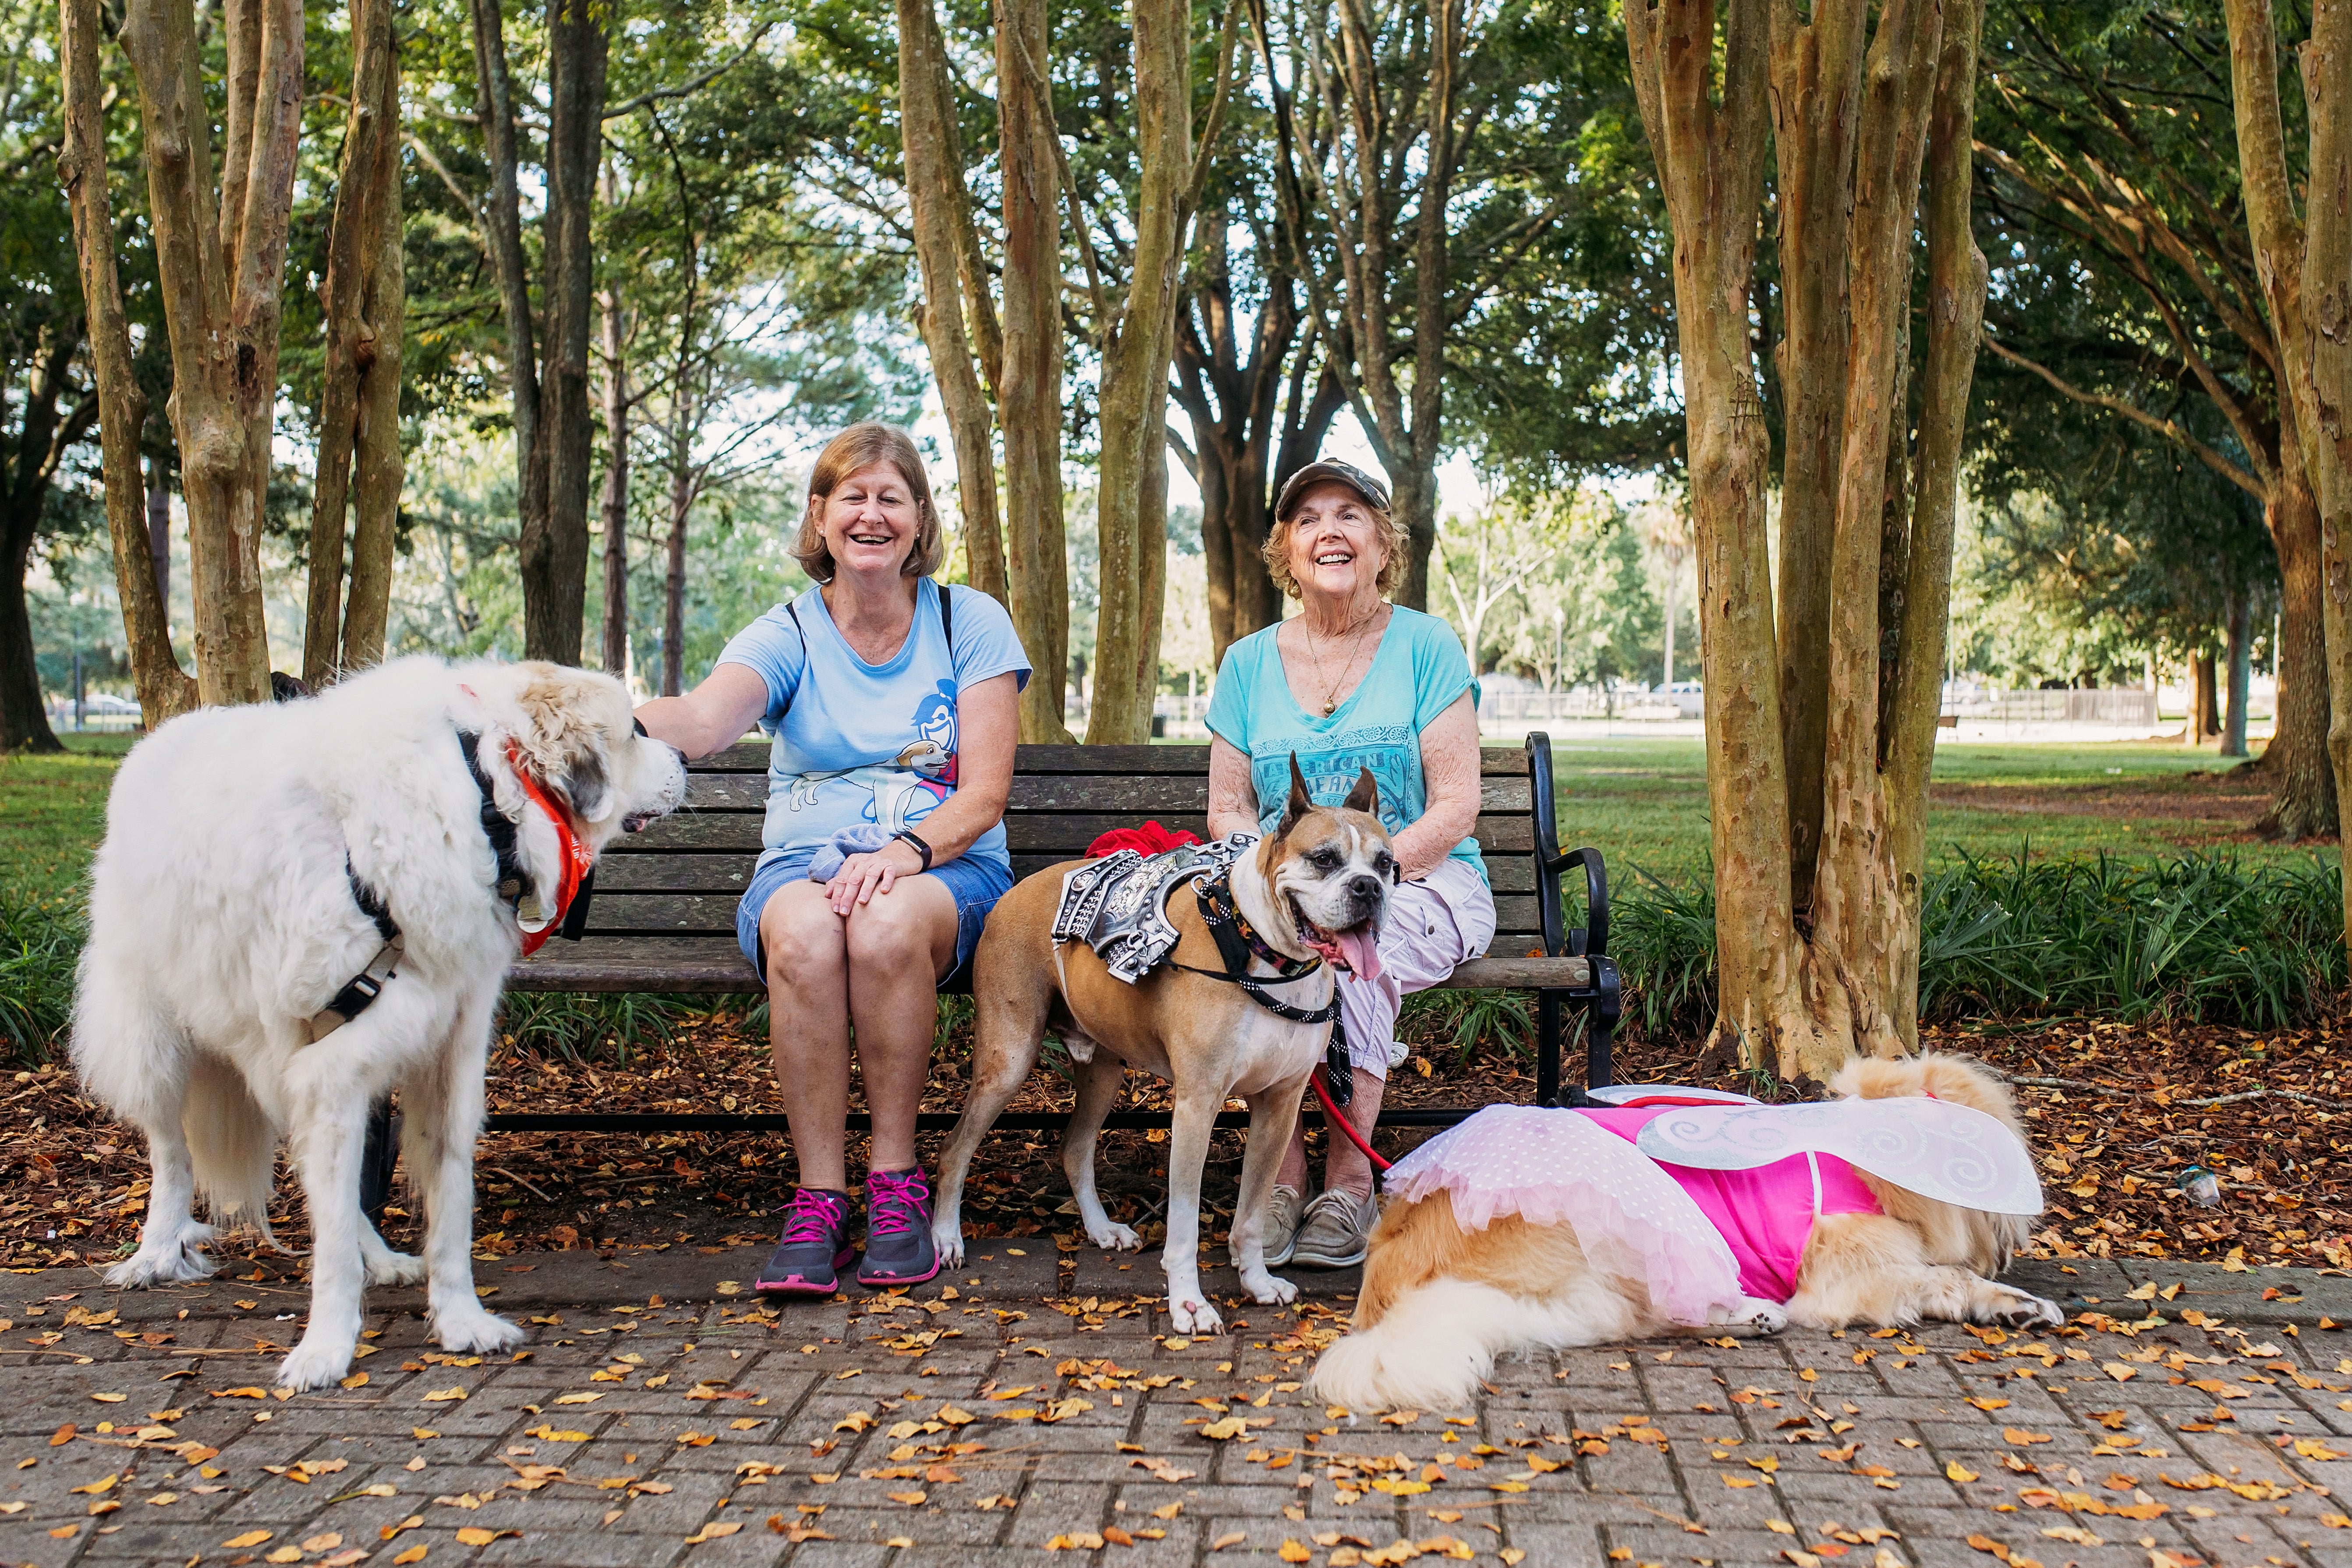 2 woman with 3 dogs sitting on park bench